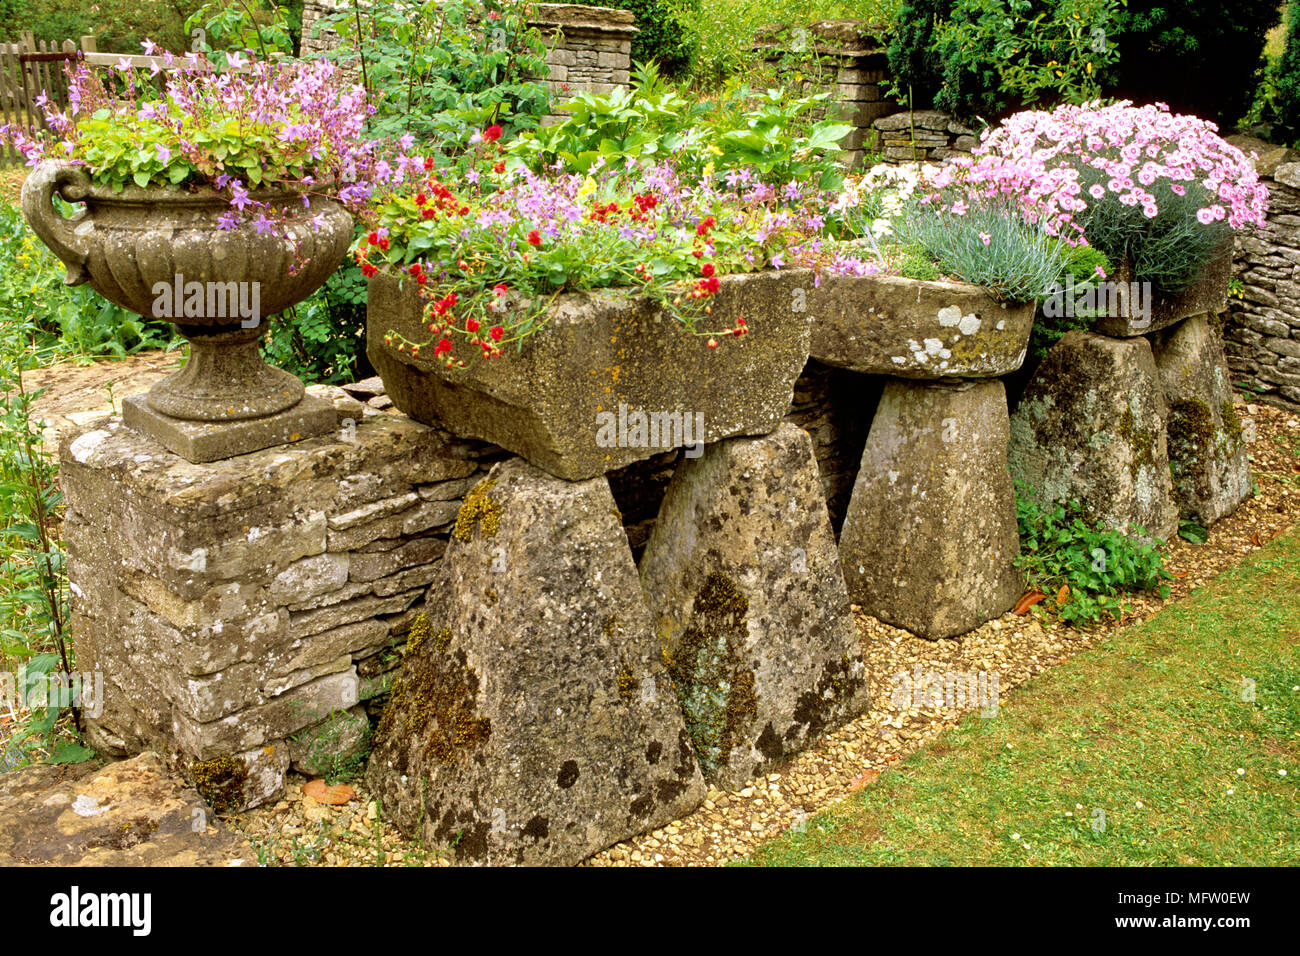 Campanula, Helianthemum and Dianthus grow in stone containers Stock Photo